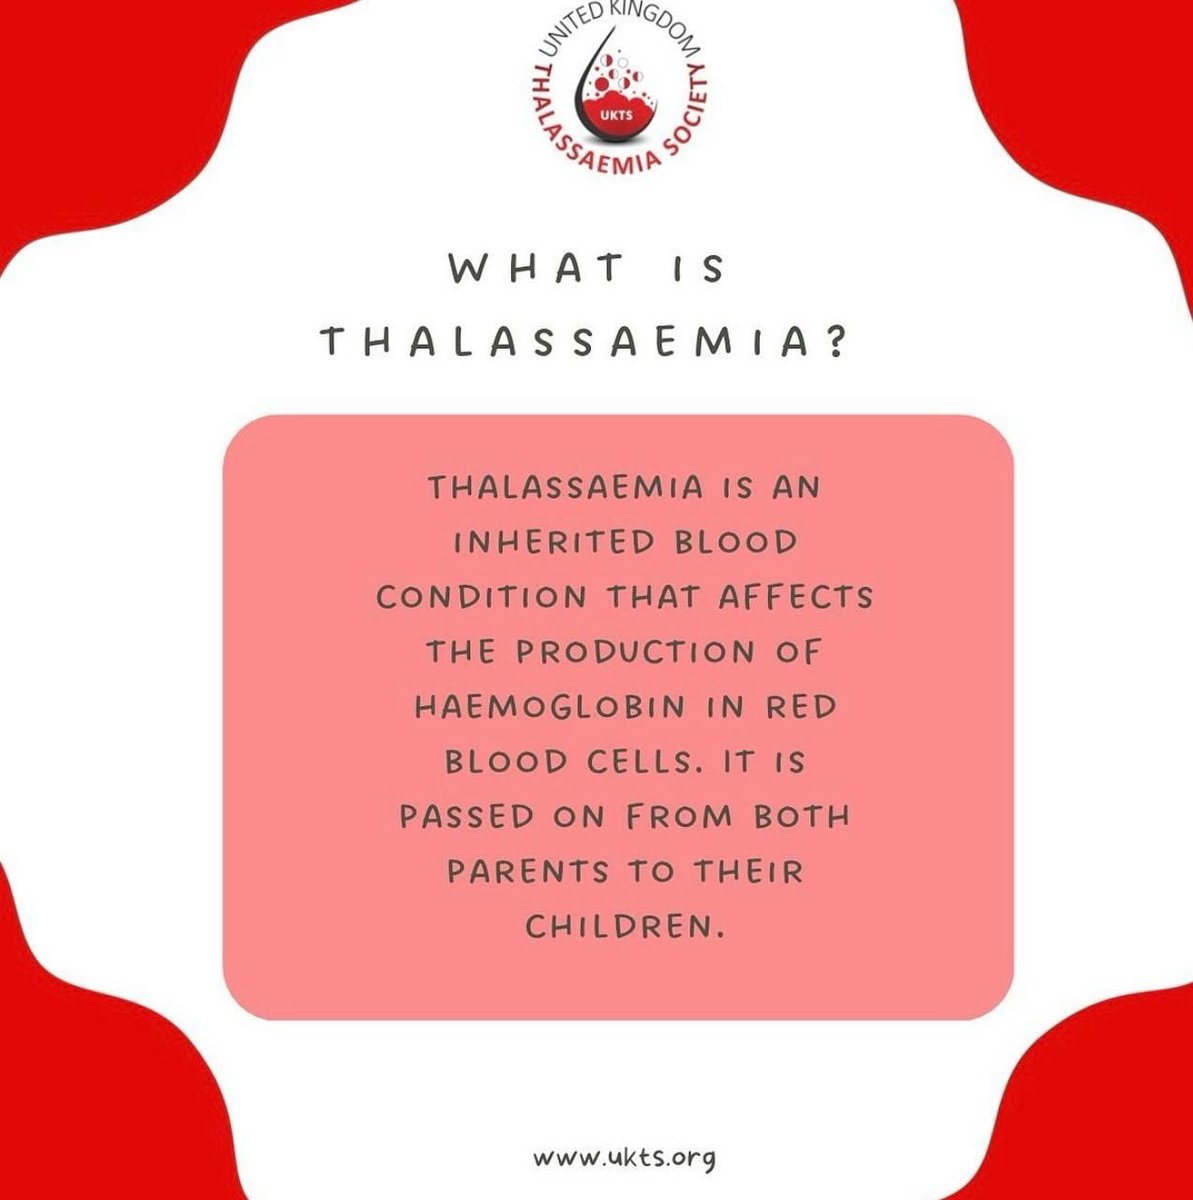 It’s been a while since we shared some basic #thalassaemia facts with you! To celebrate International Thalassaemia Day 2024, we have created some new educational material for social media- please share it with everyone you know! #teamukts #ITD2024 #WorkingForThalassaemia